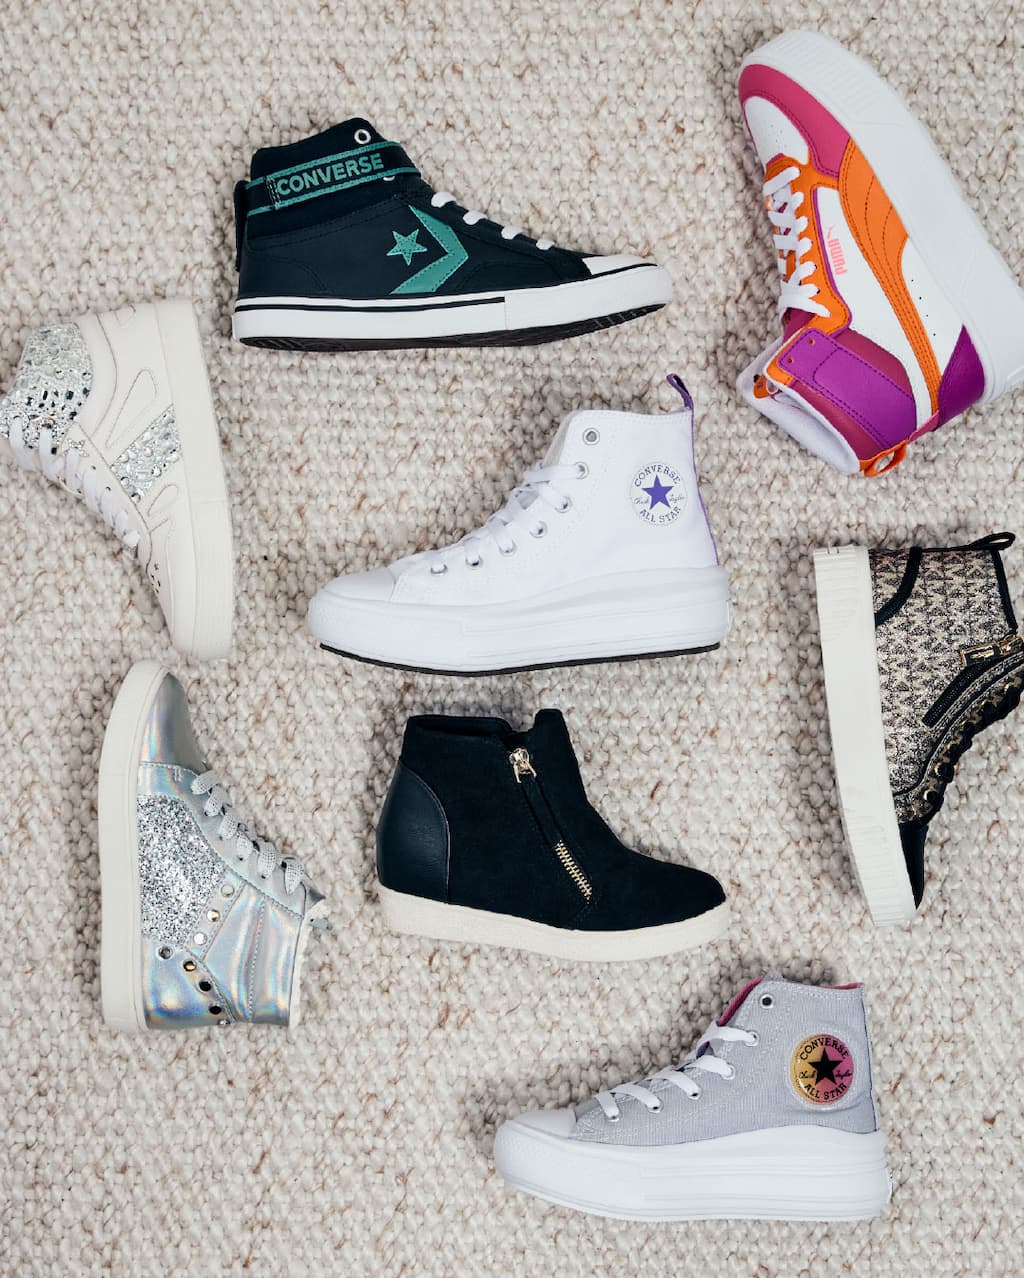 tabak Stadium contact Converse Shoes | High Top & Low Top Sneakers | Chuck Taylors | DSW